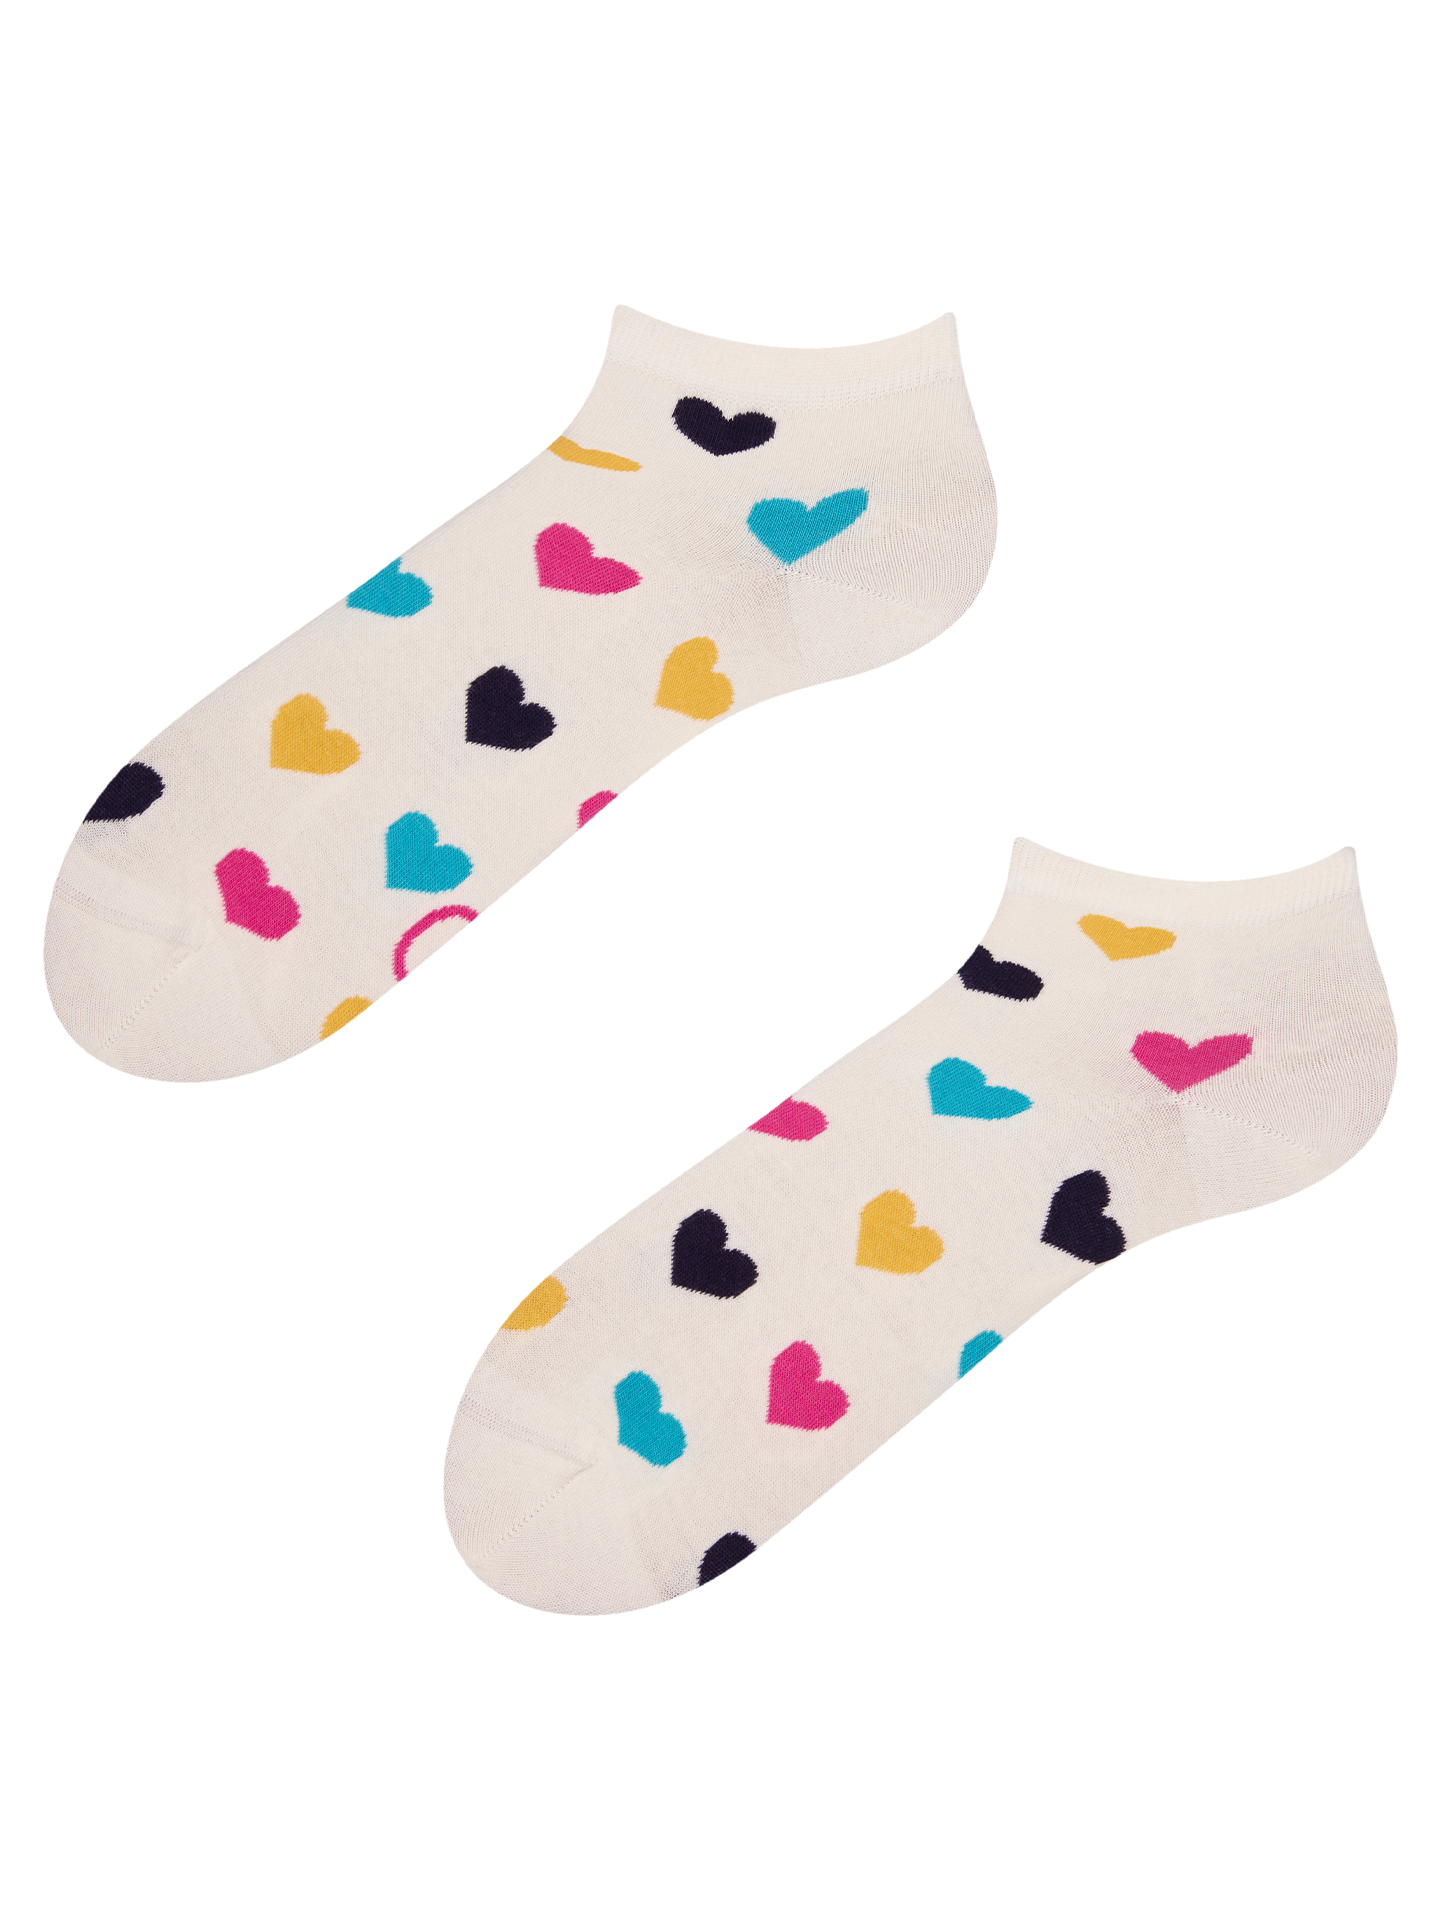 Ankle Socks Colorful Hearts